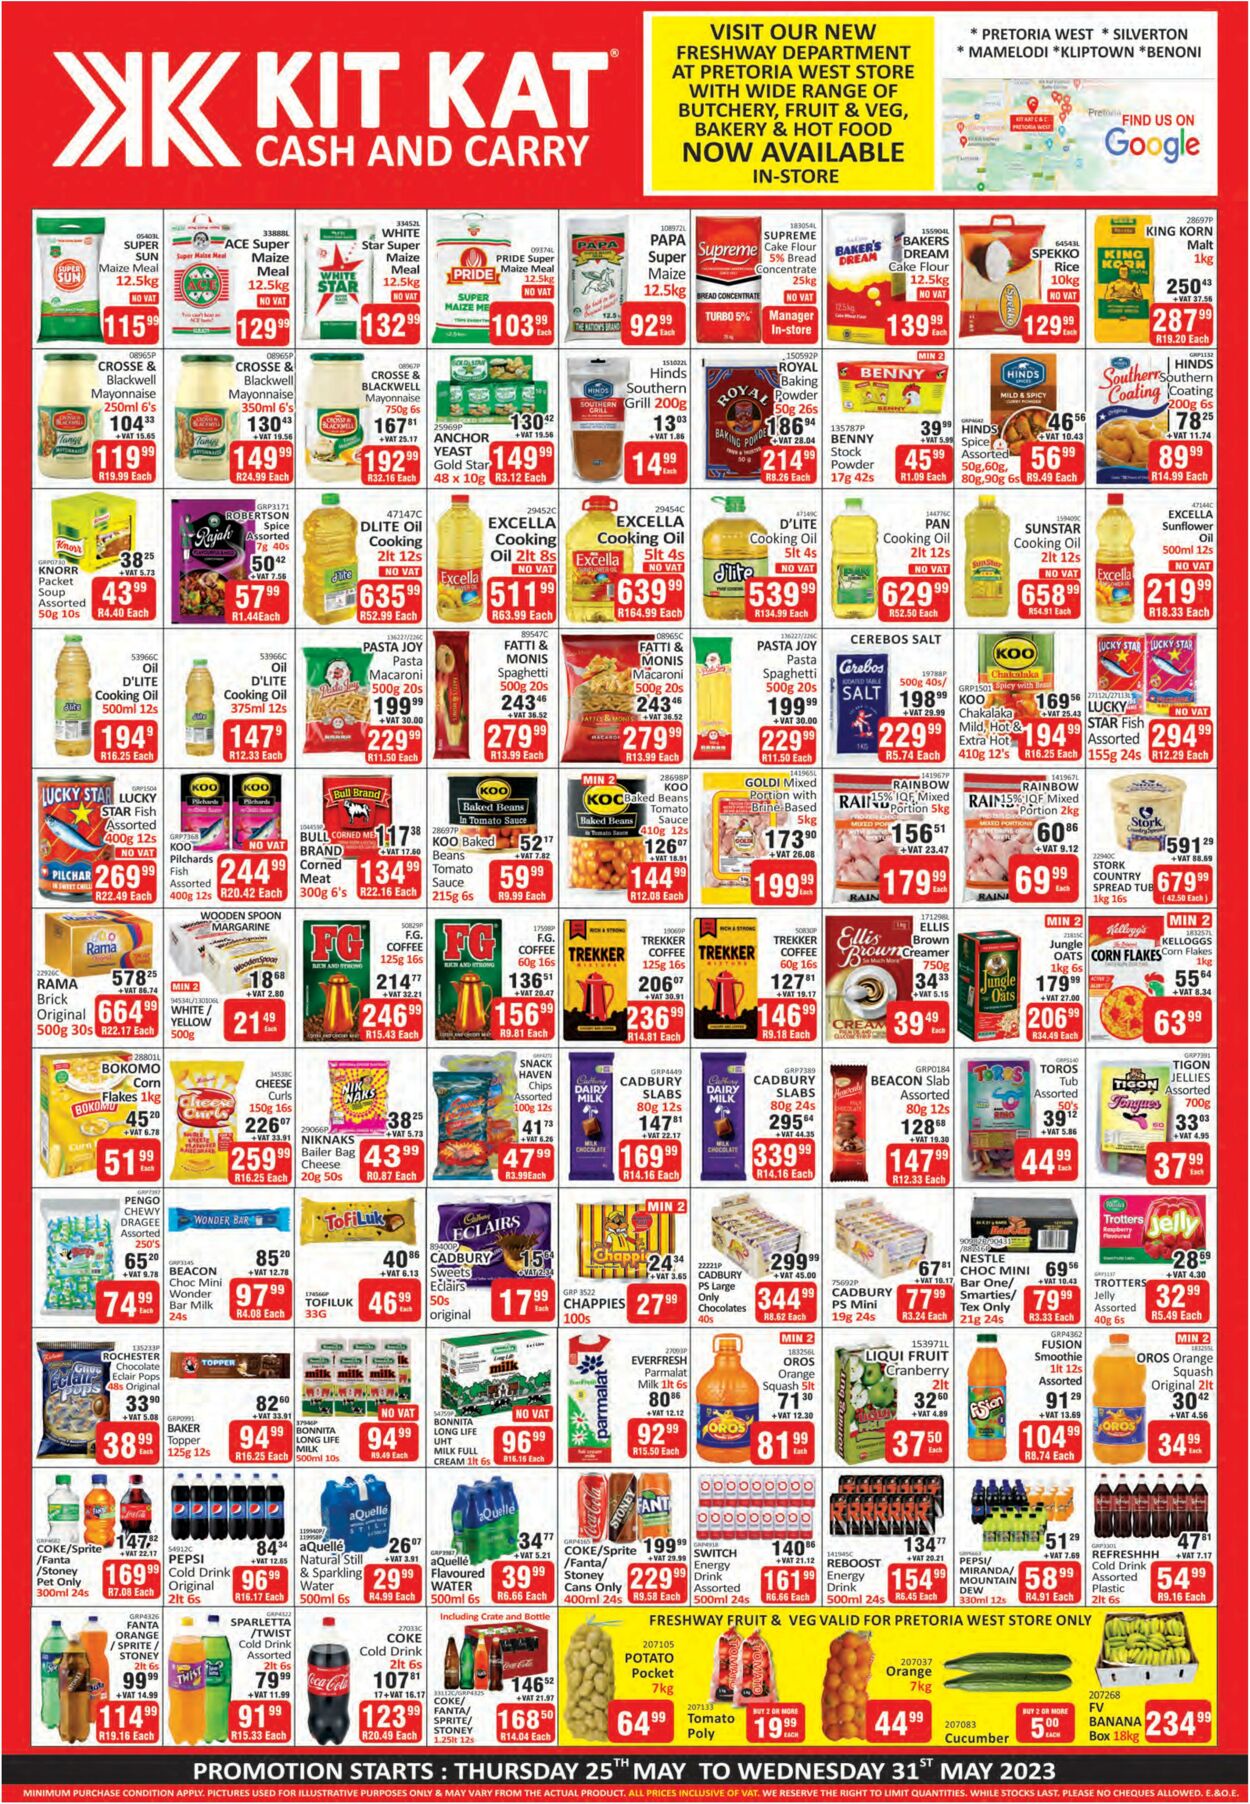 Special Kit Kat Cash and Carry 25.05.2023 - 31.05.2023